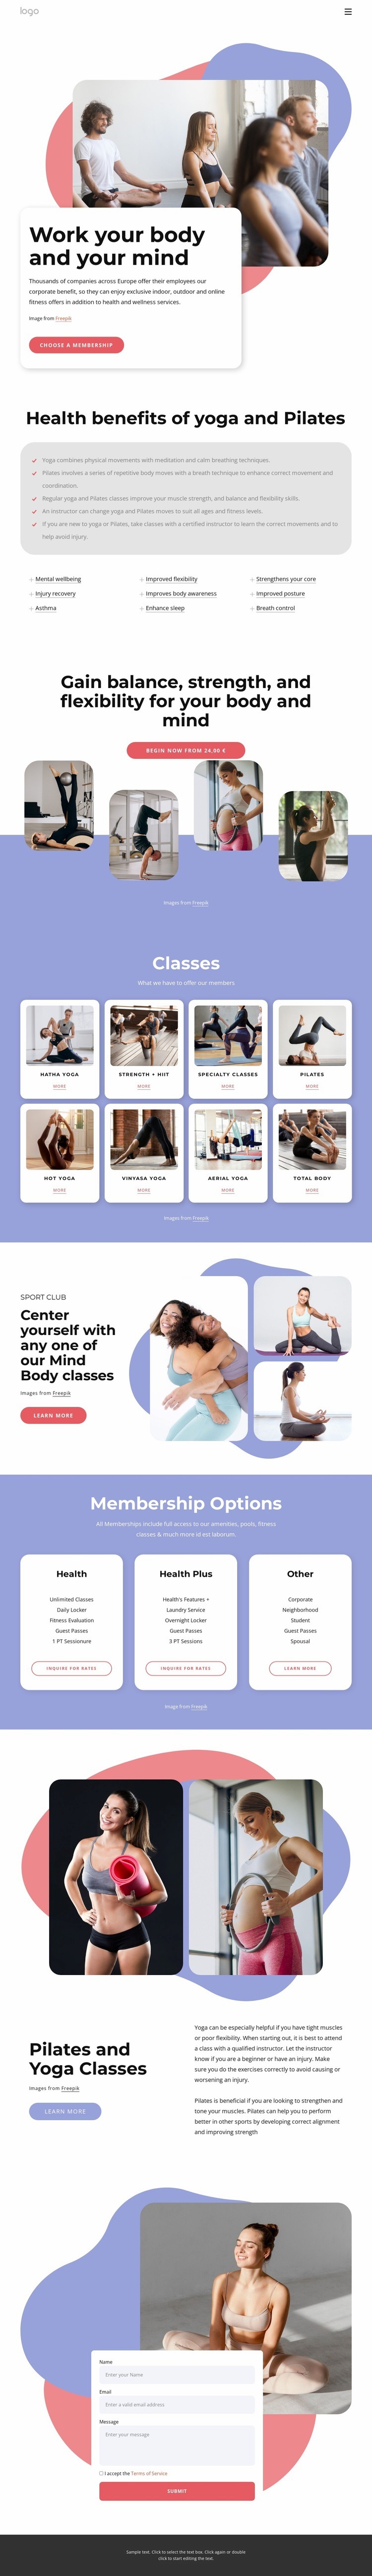 Pilates and yoga classes Web Page Design